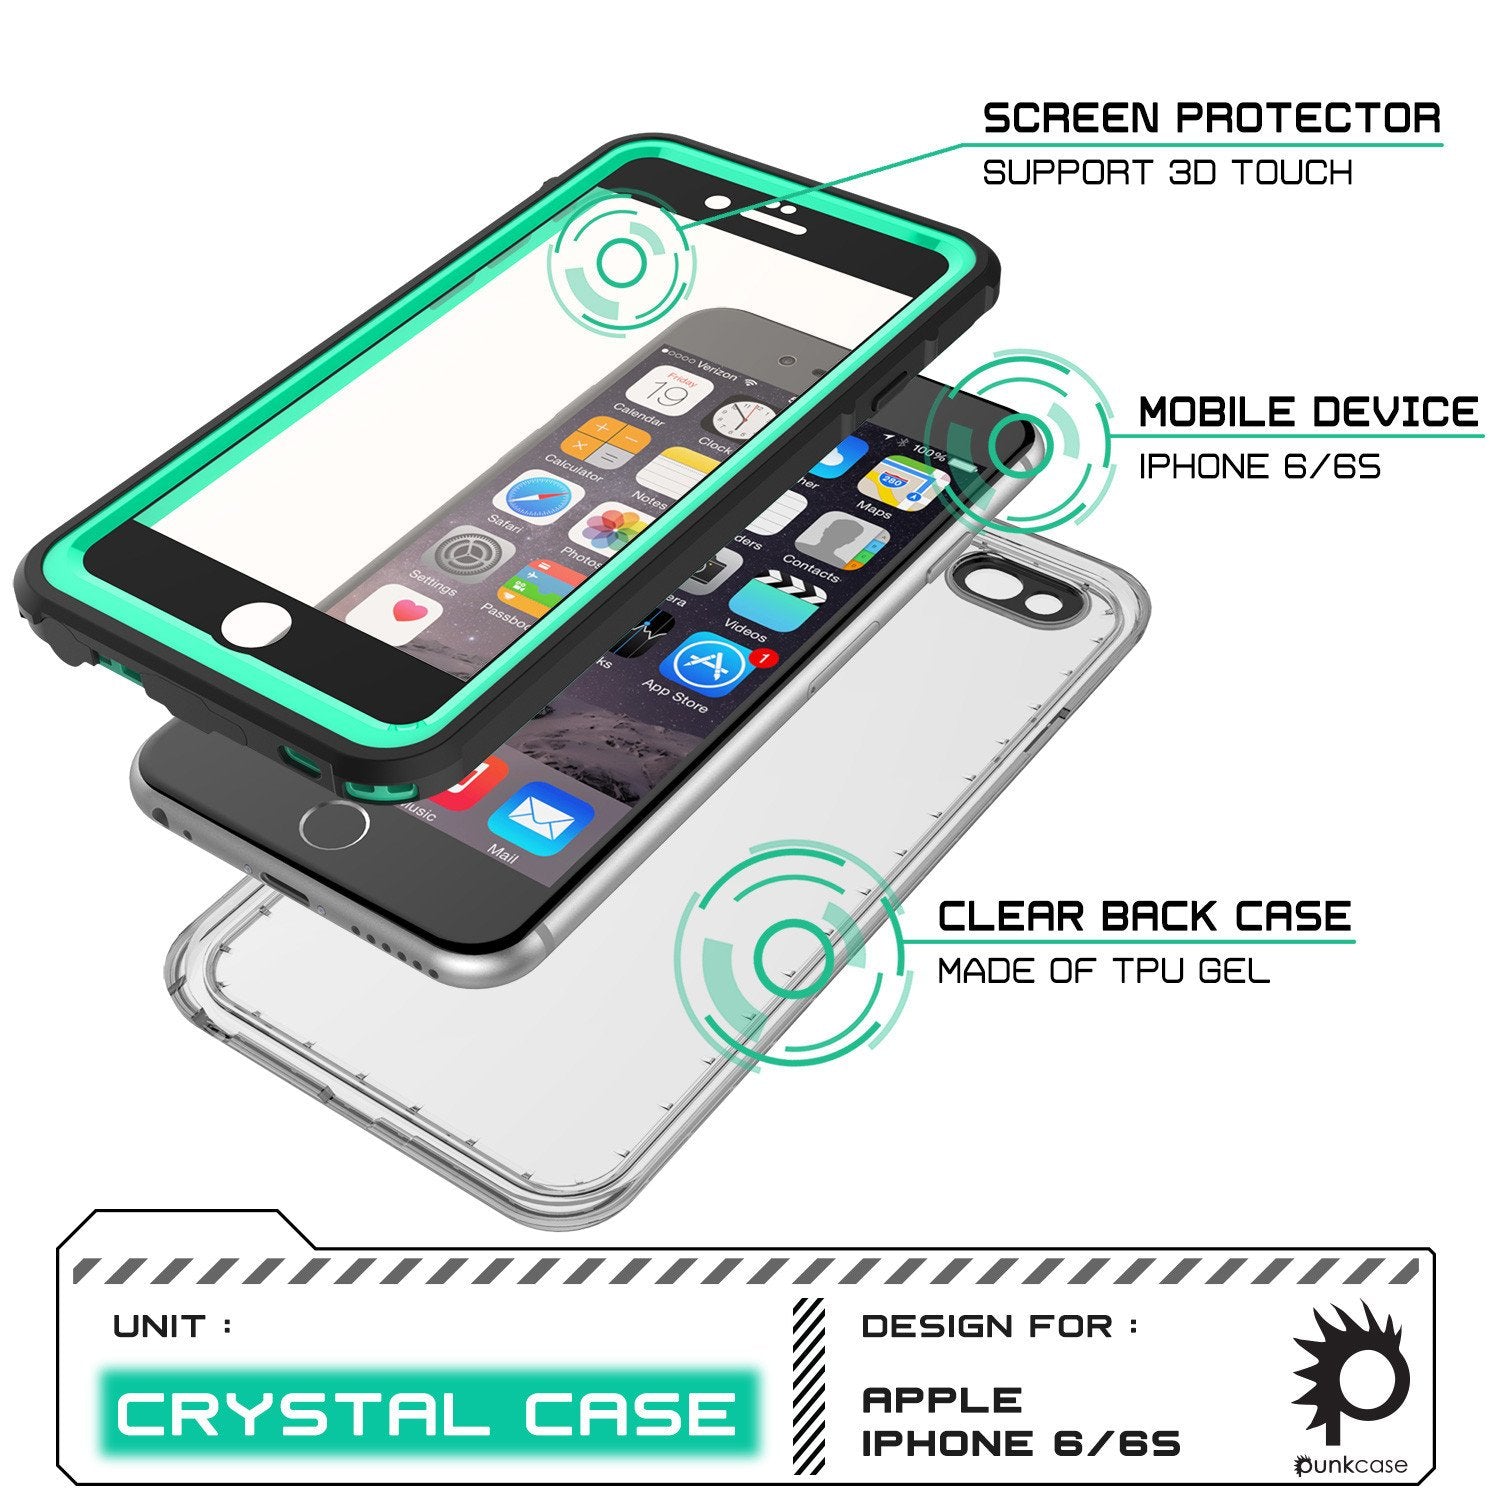 iPhone 6+/6S+ Plus Waterproof Case, PUNKcase CRYSTAL Teal W/ Attached Screen Protector | Warranty - PunkCase NZ